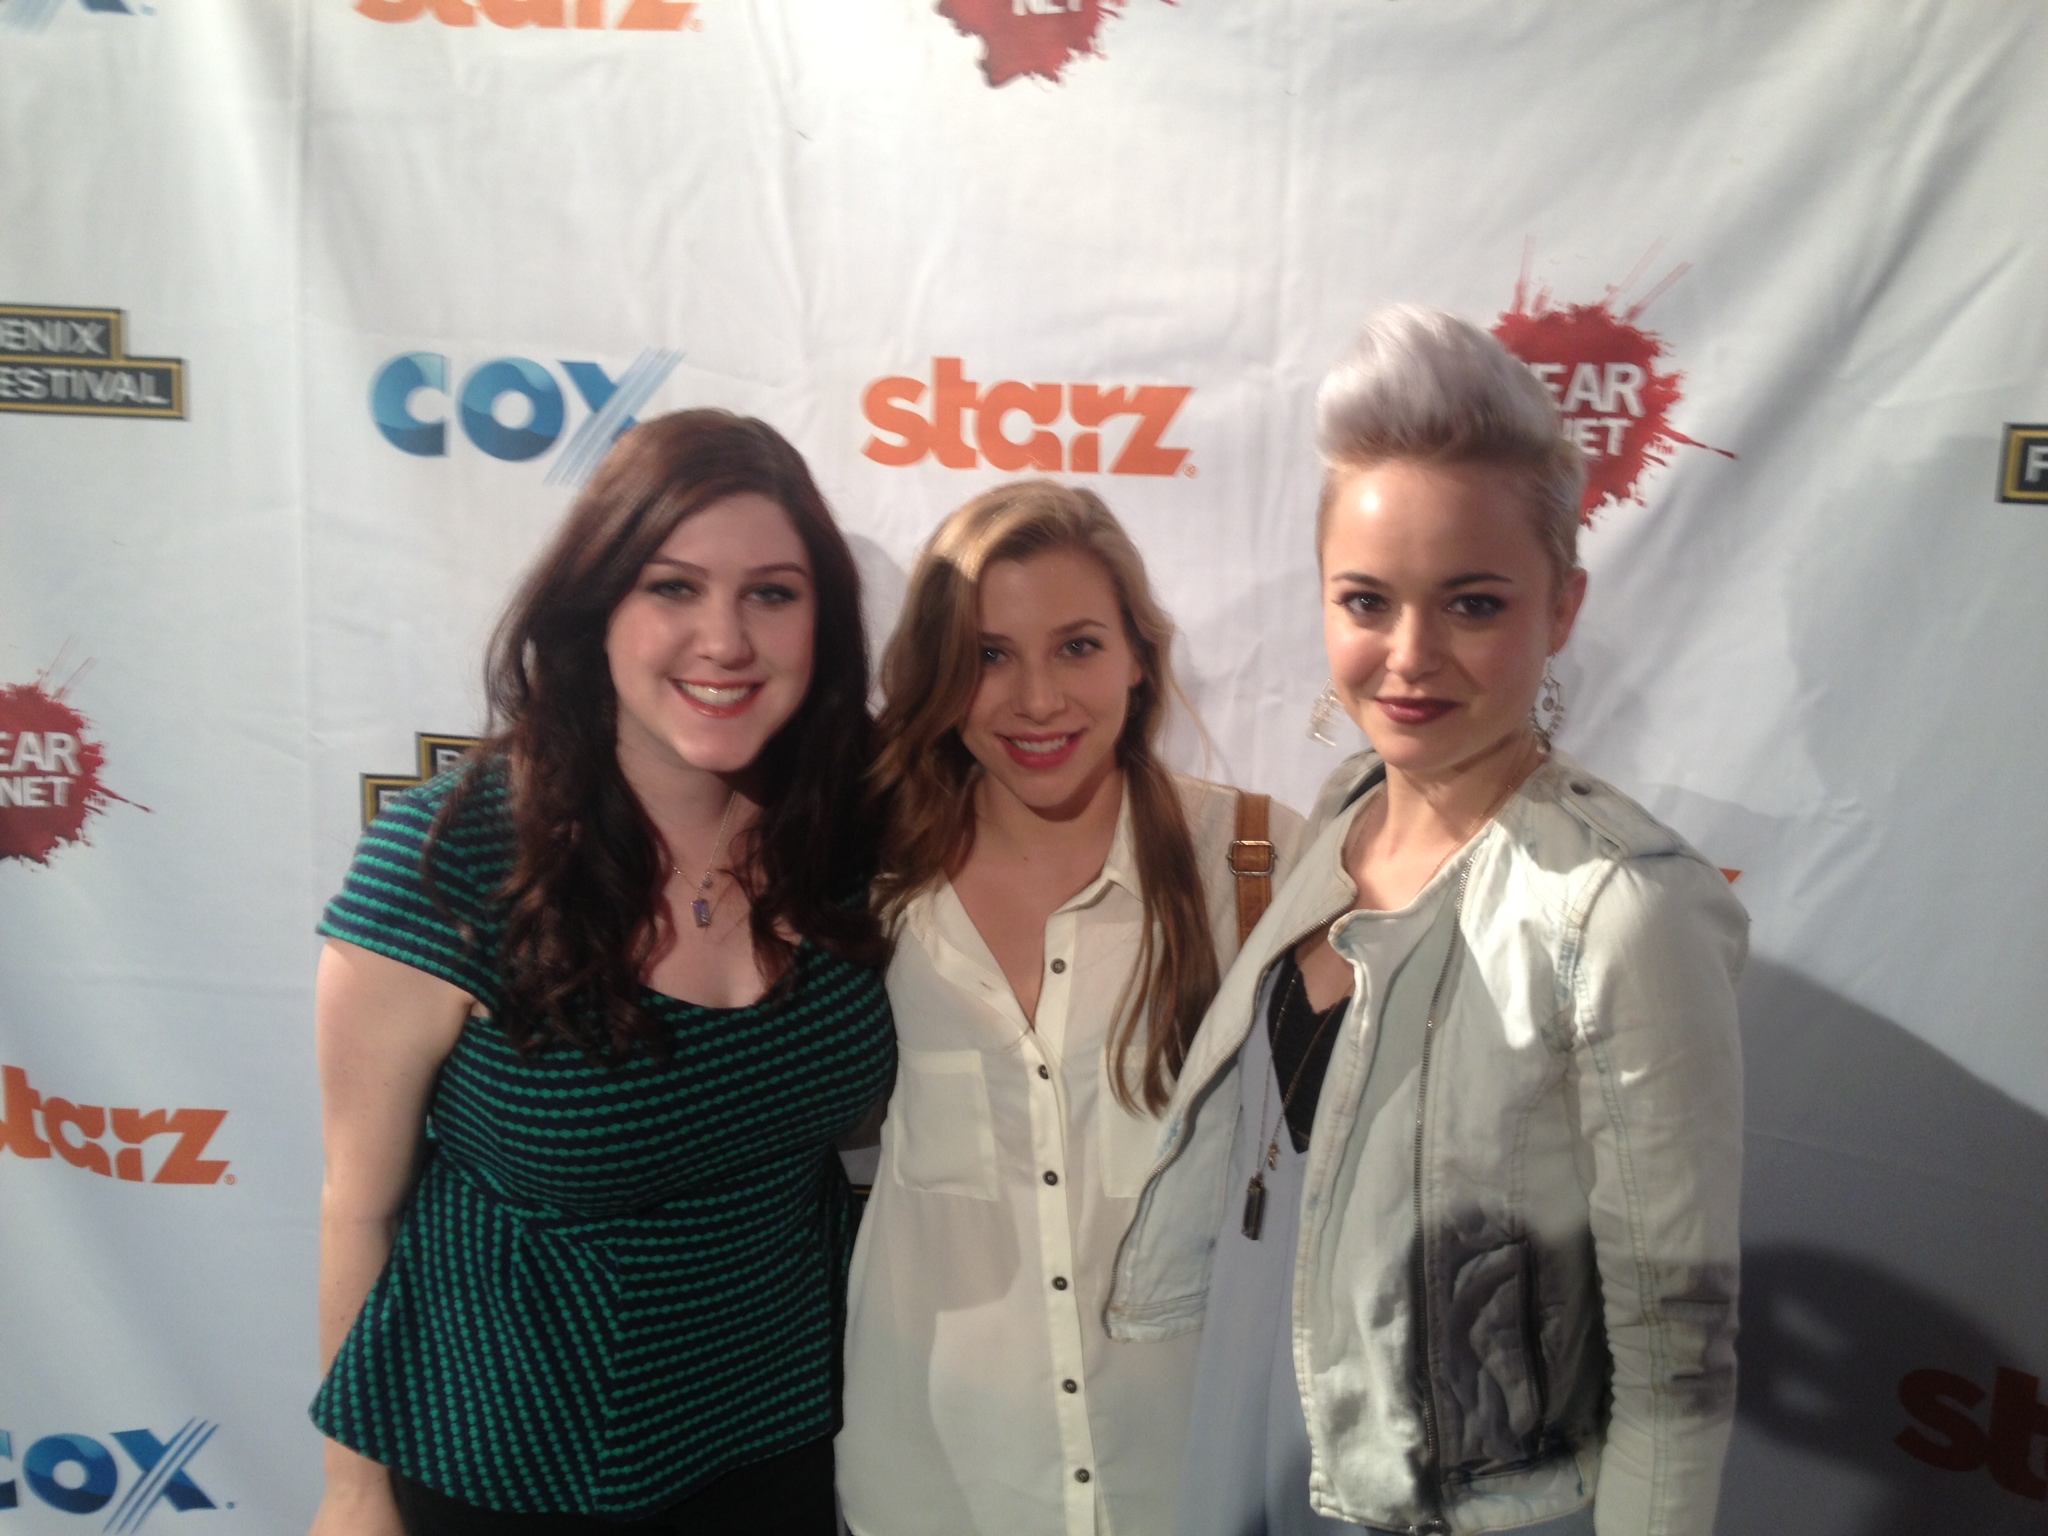 Nora Jobling, Skyler Day, and Stacey Danger at the premiere of Channeling, Phoenix Film Fest 2013